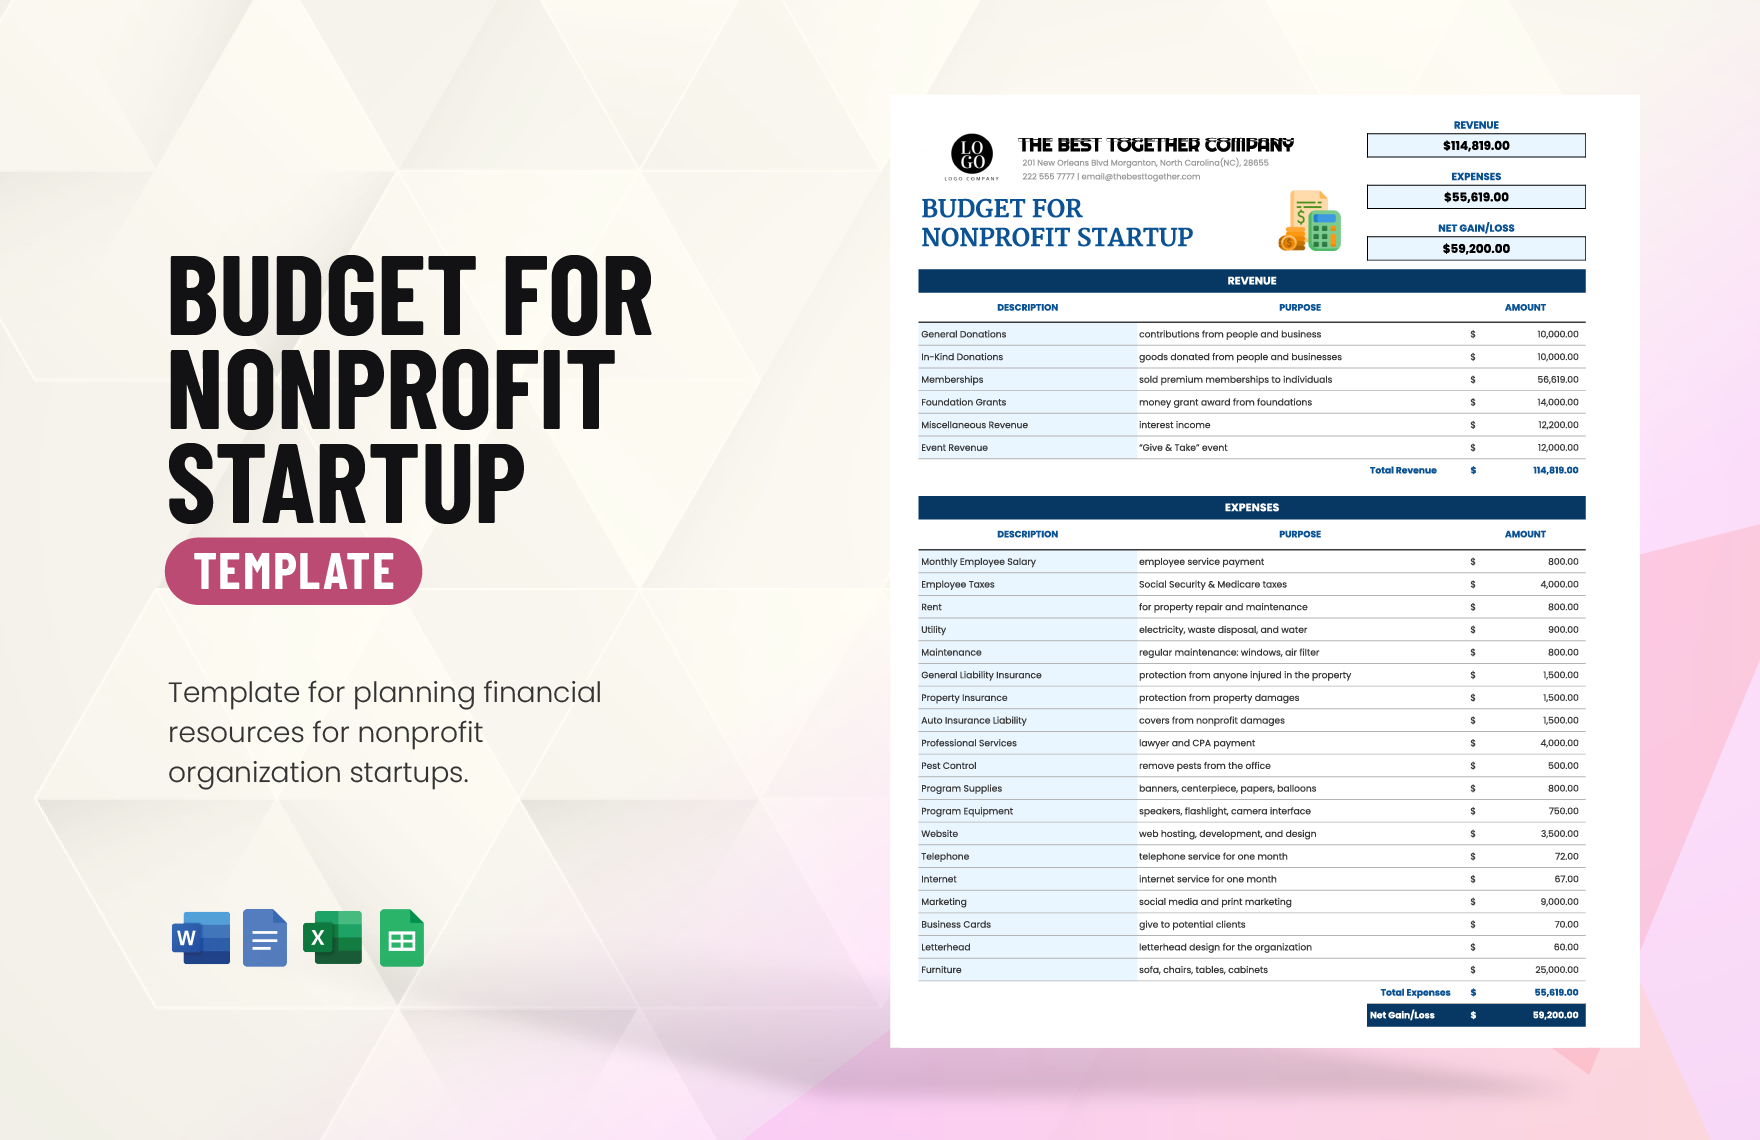 Budget for Nonprofit Startup Template in Word, Google Docs, Excel, Google Sheets